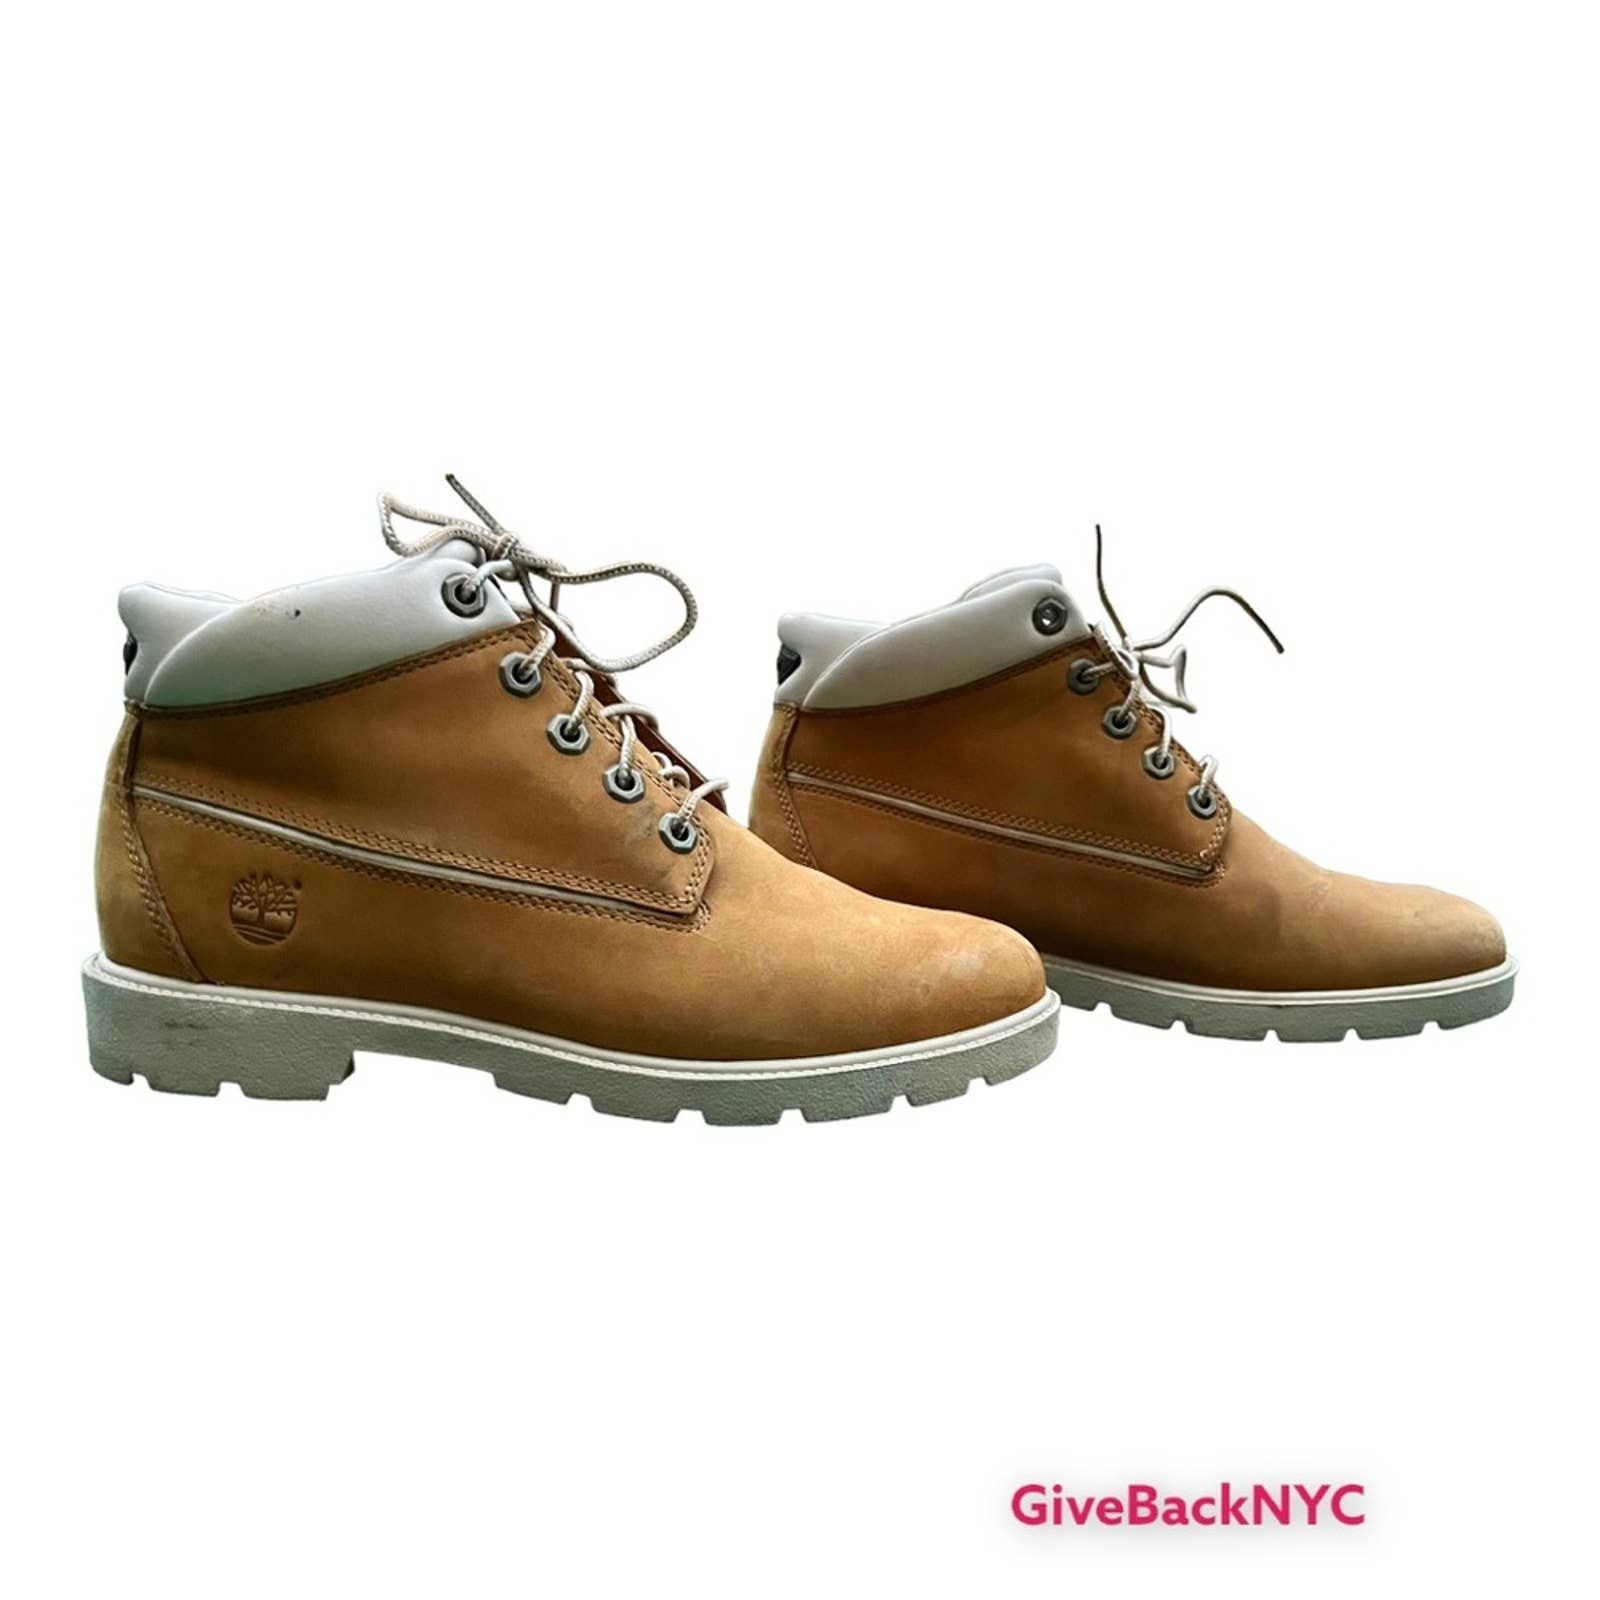 Timberland Timberland 5-Eye Leather Chukka Boot in Tan Size 7 Size US 8 / IT 38 - 2 Preview